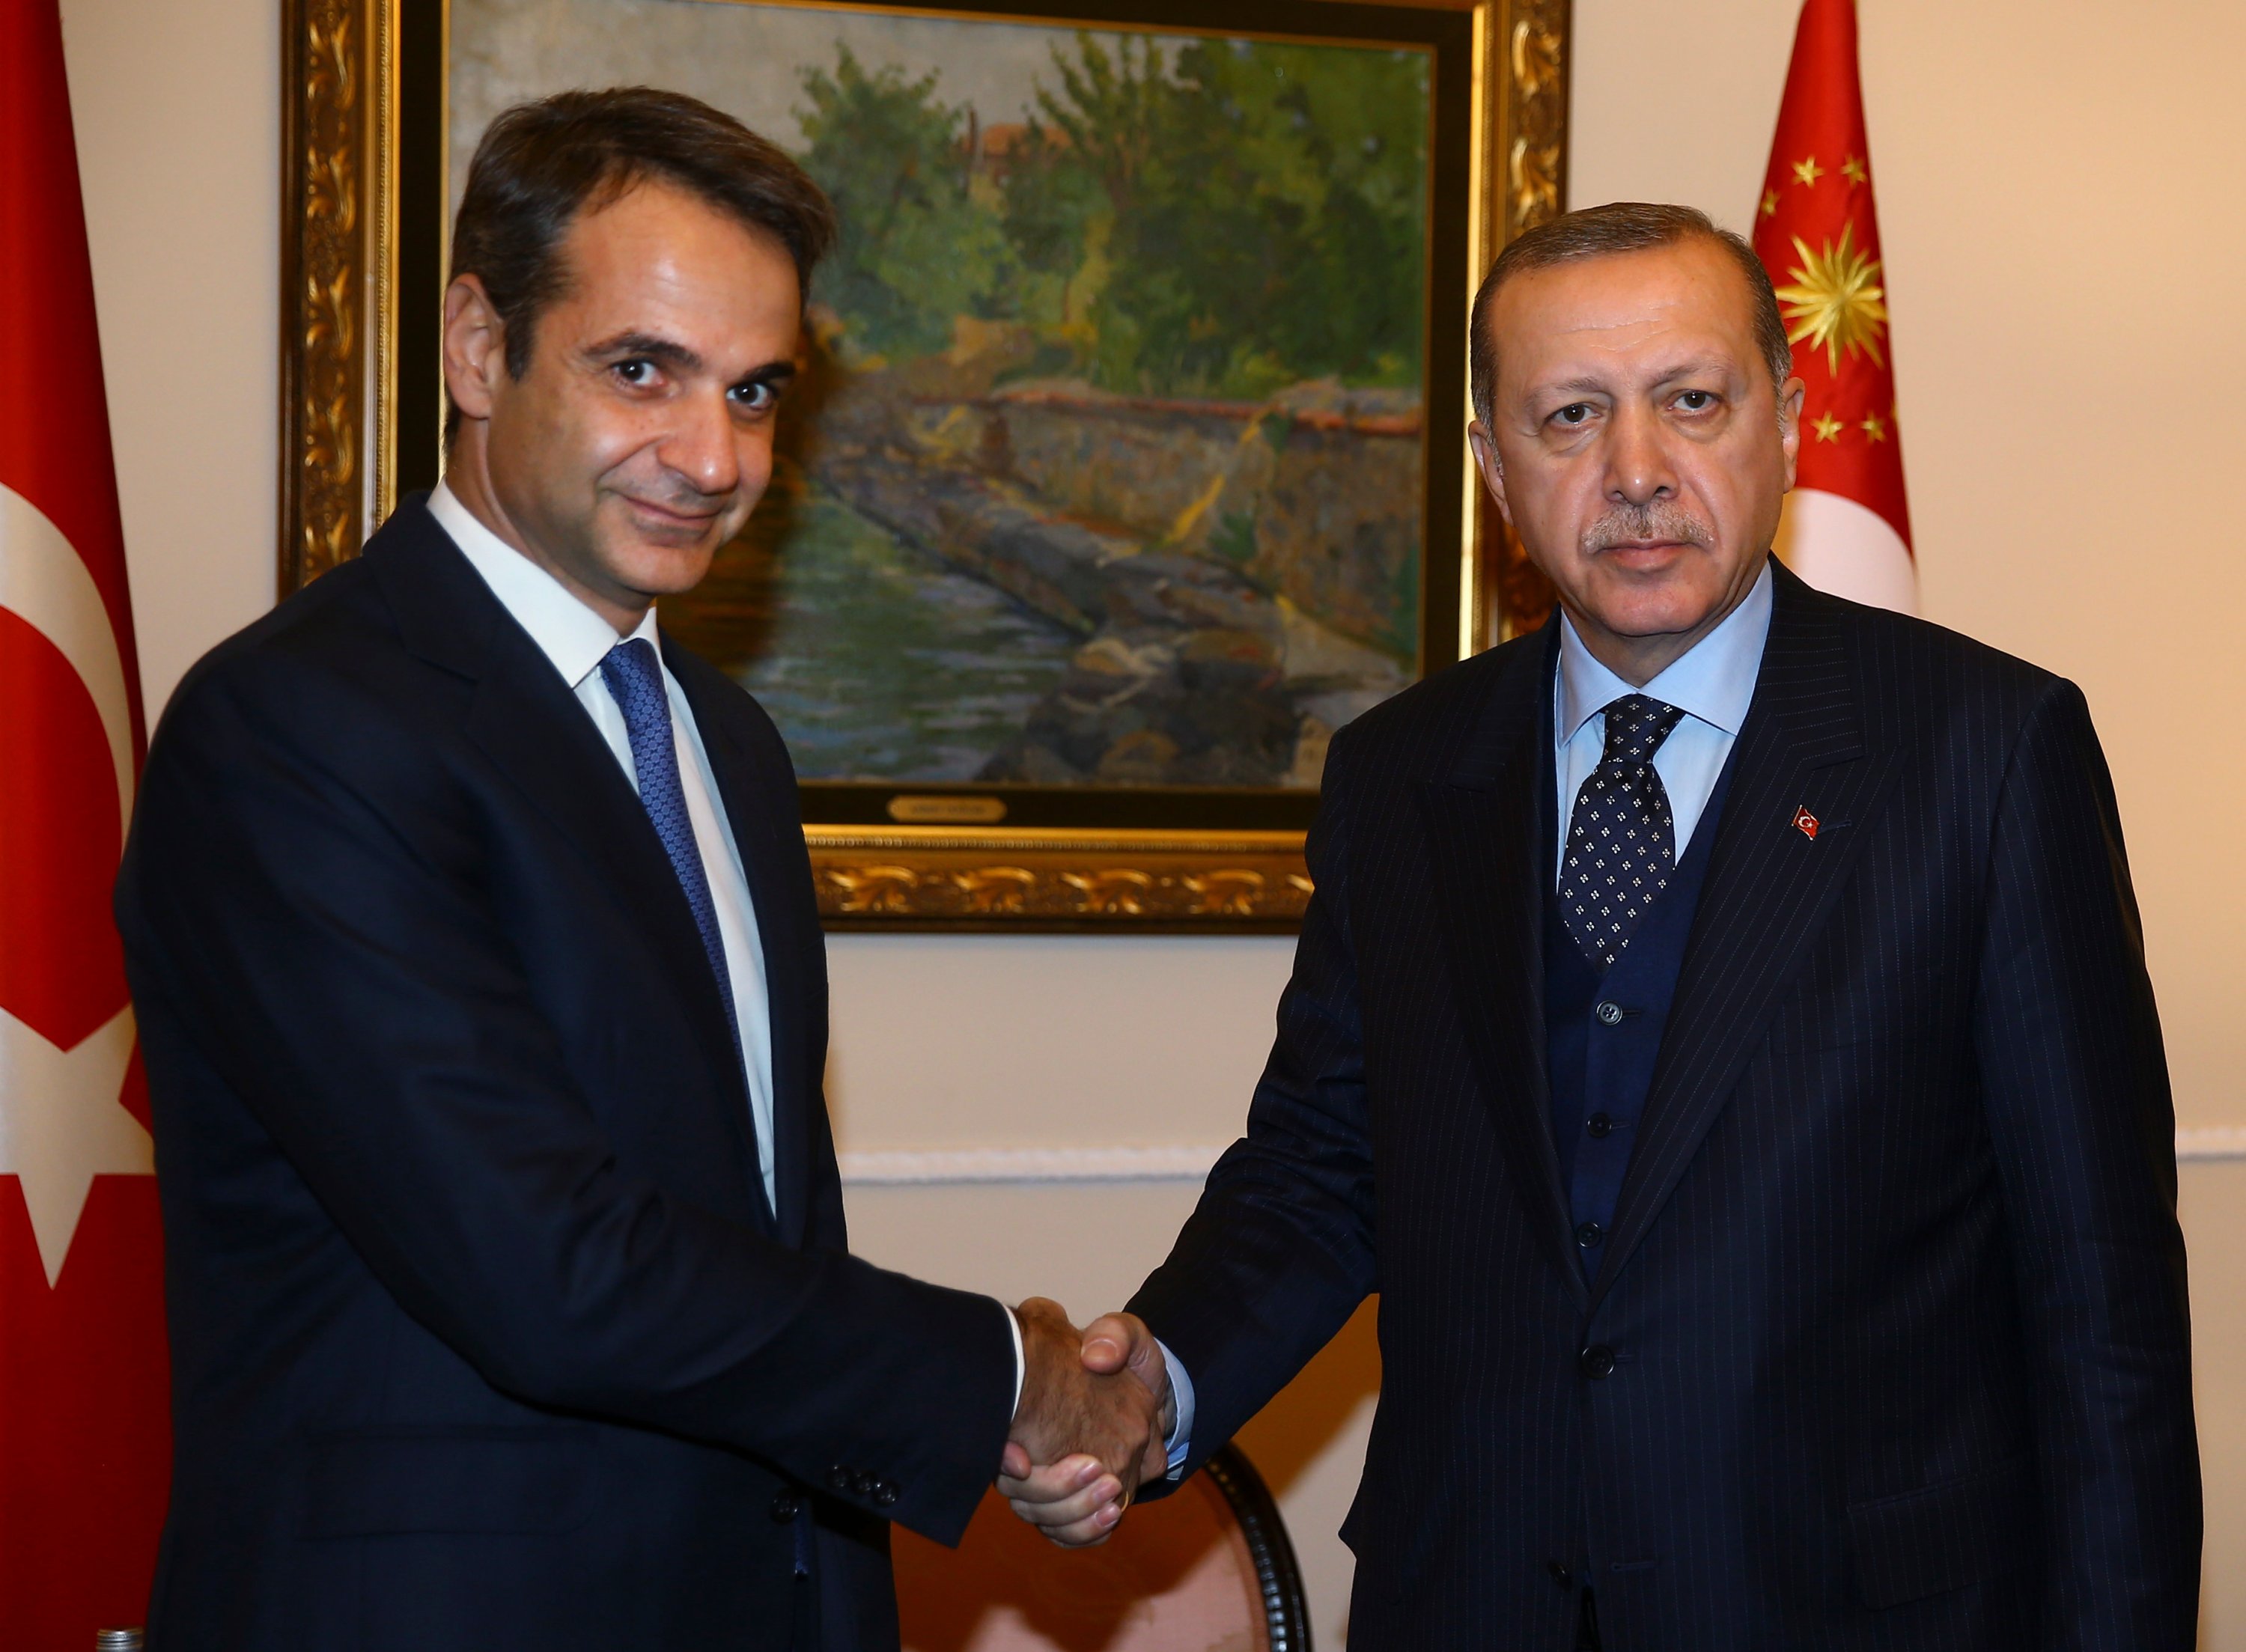 Greek PM Mitsotakis more comfortable speaking with Erdoğan after ice-breaking phone call | Daily Sabah